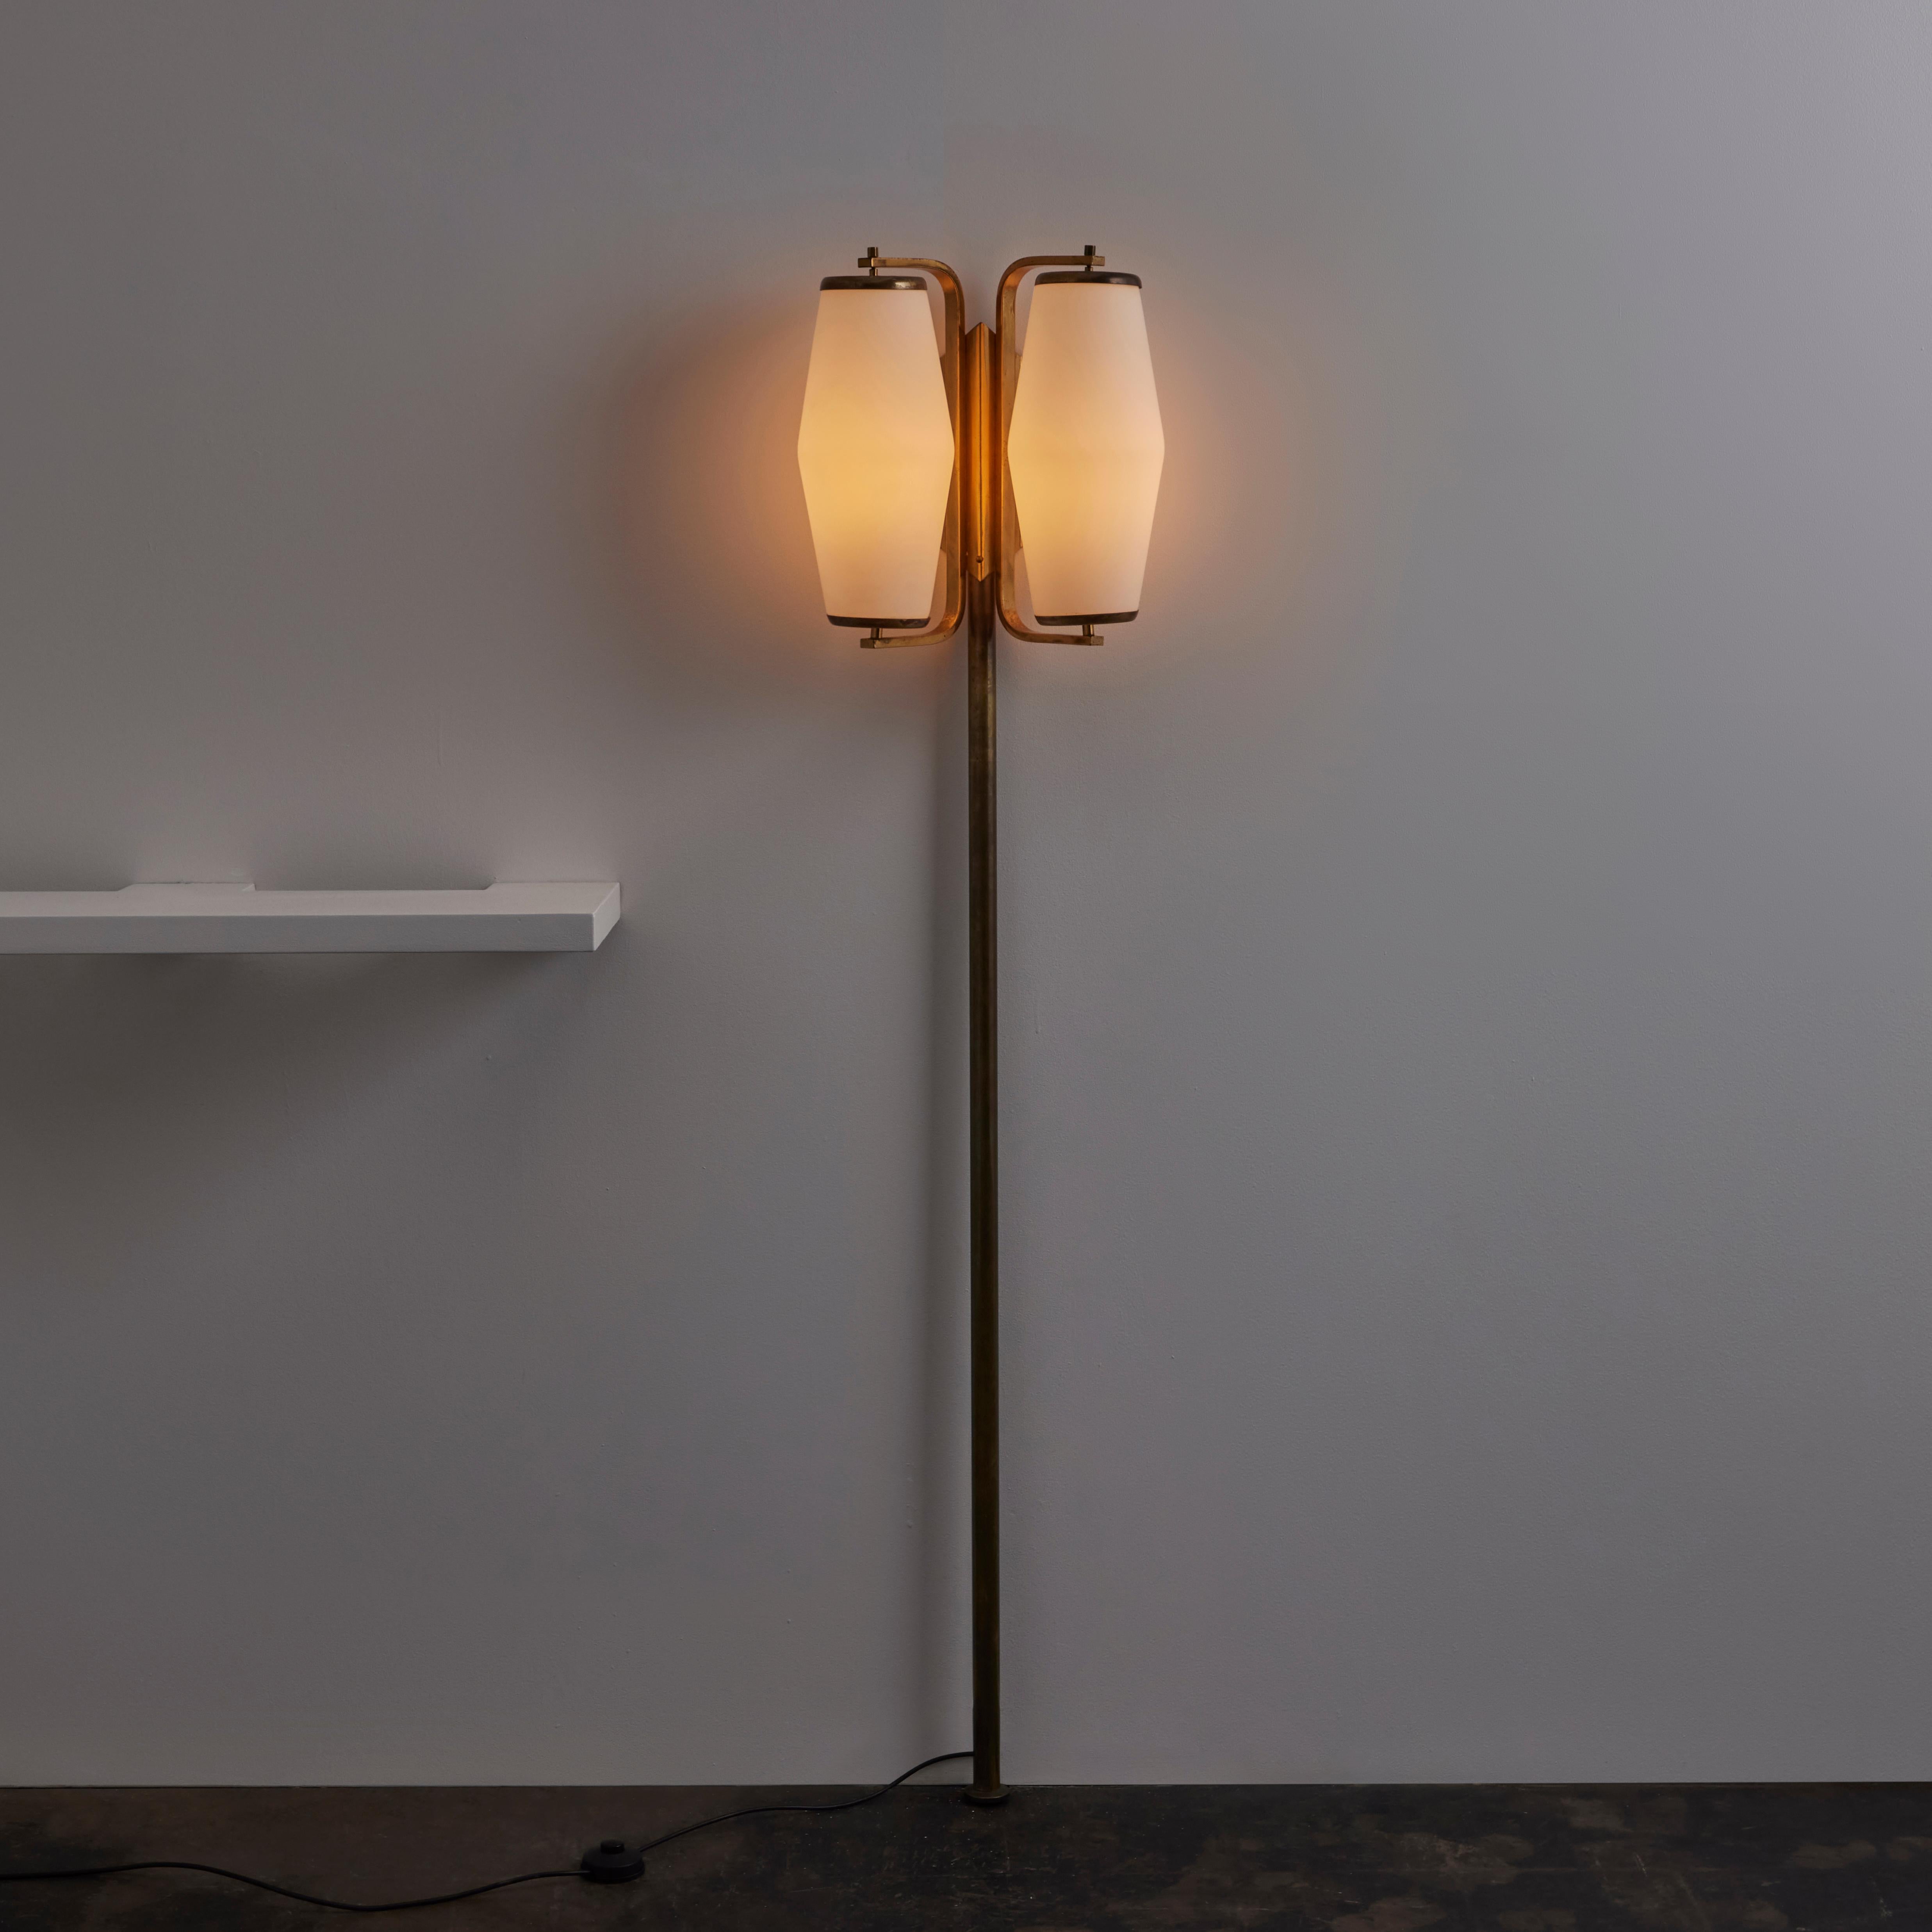 Rare Floor Lamp by Stilnovo. Designed and manufactured in Italy, circa the 1950s. A gorgeous wall-mounted floor lamp comprising of double-breasted opaline glass diffusers and a polished brass post. The wall-mounted bracket located near the top